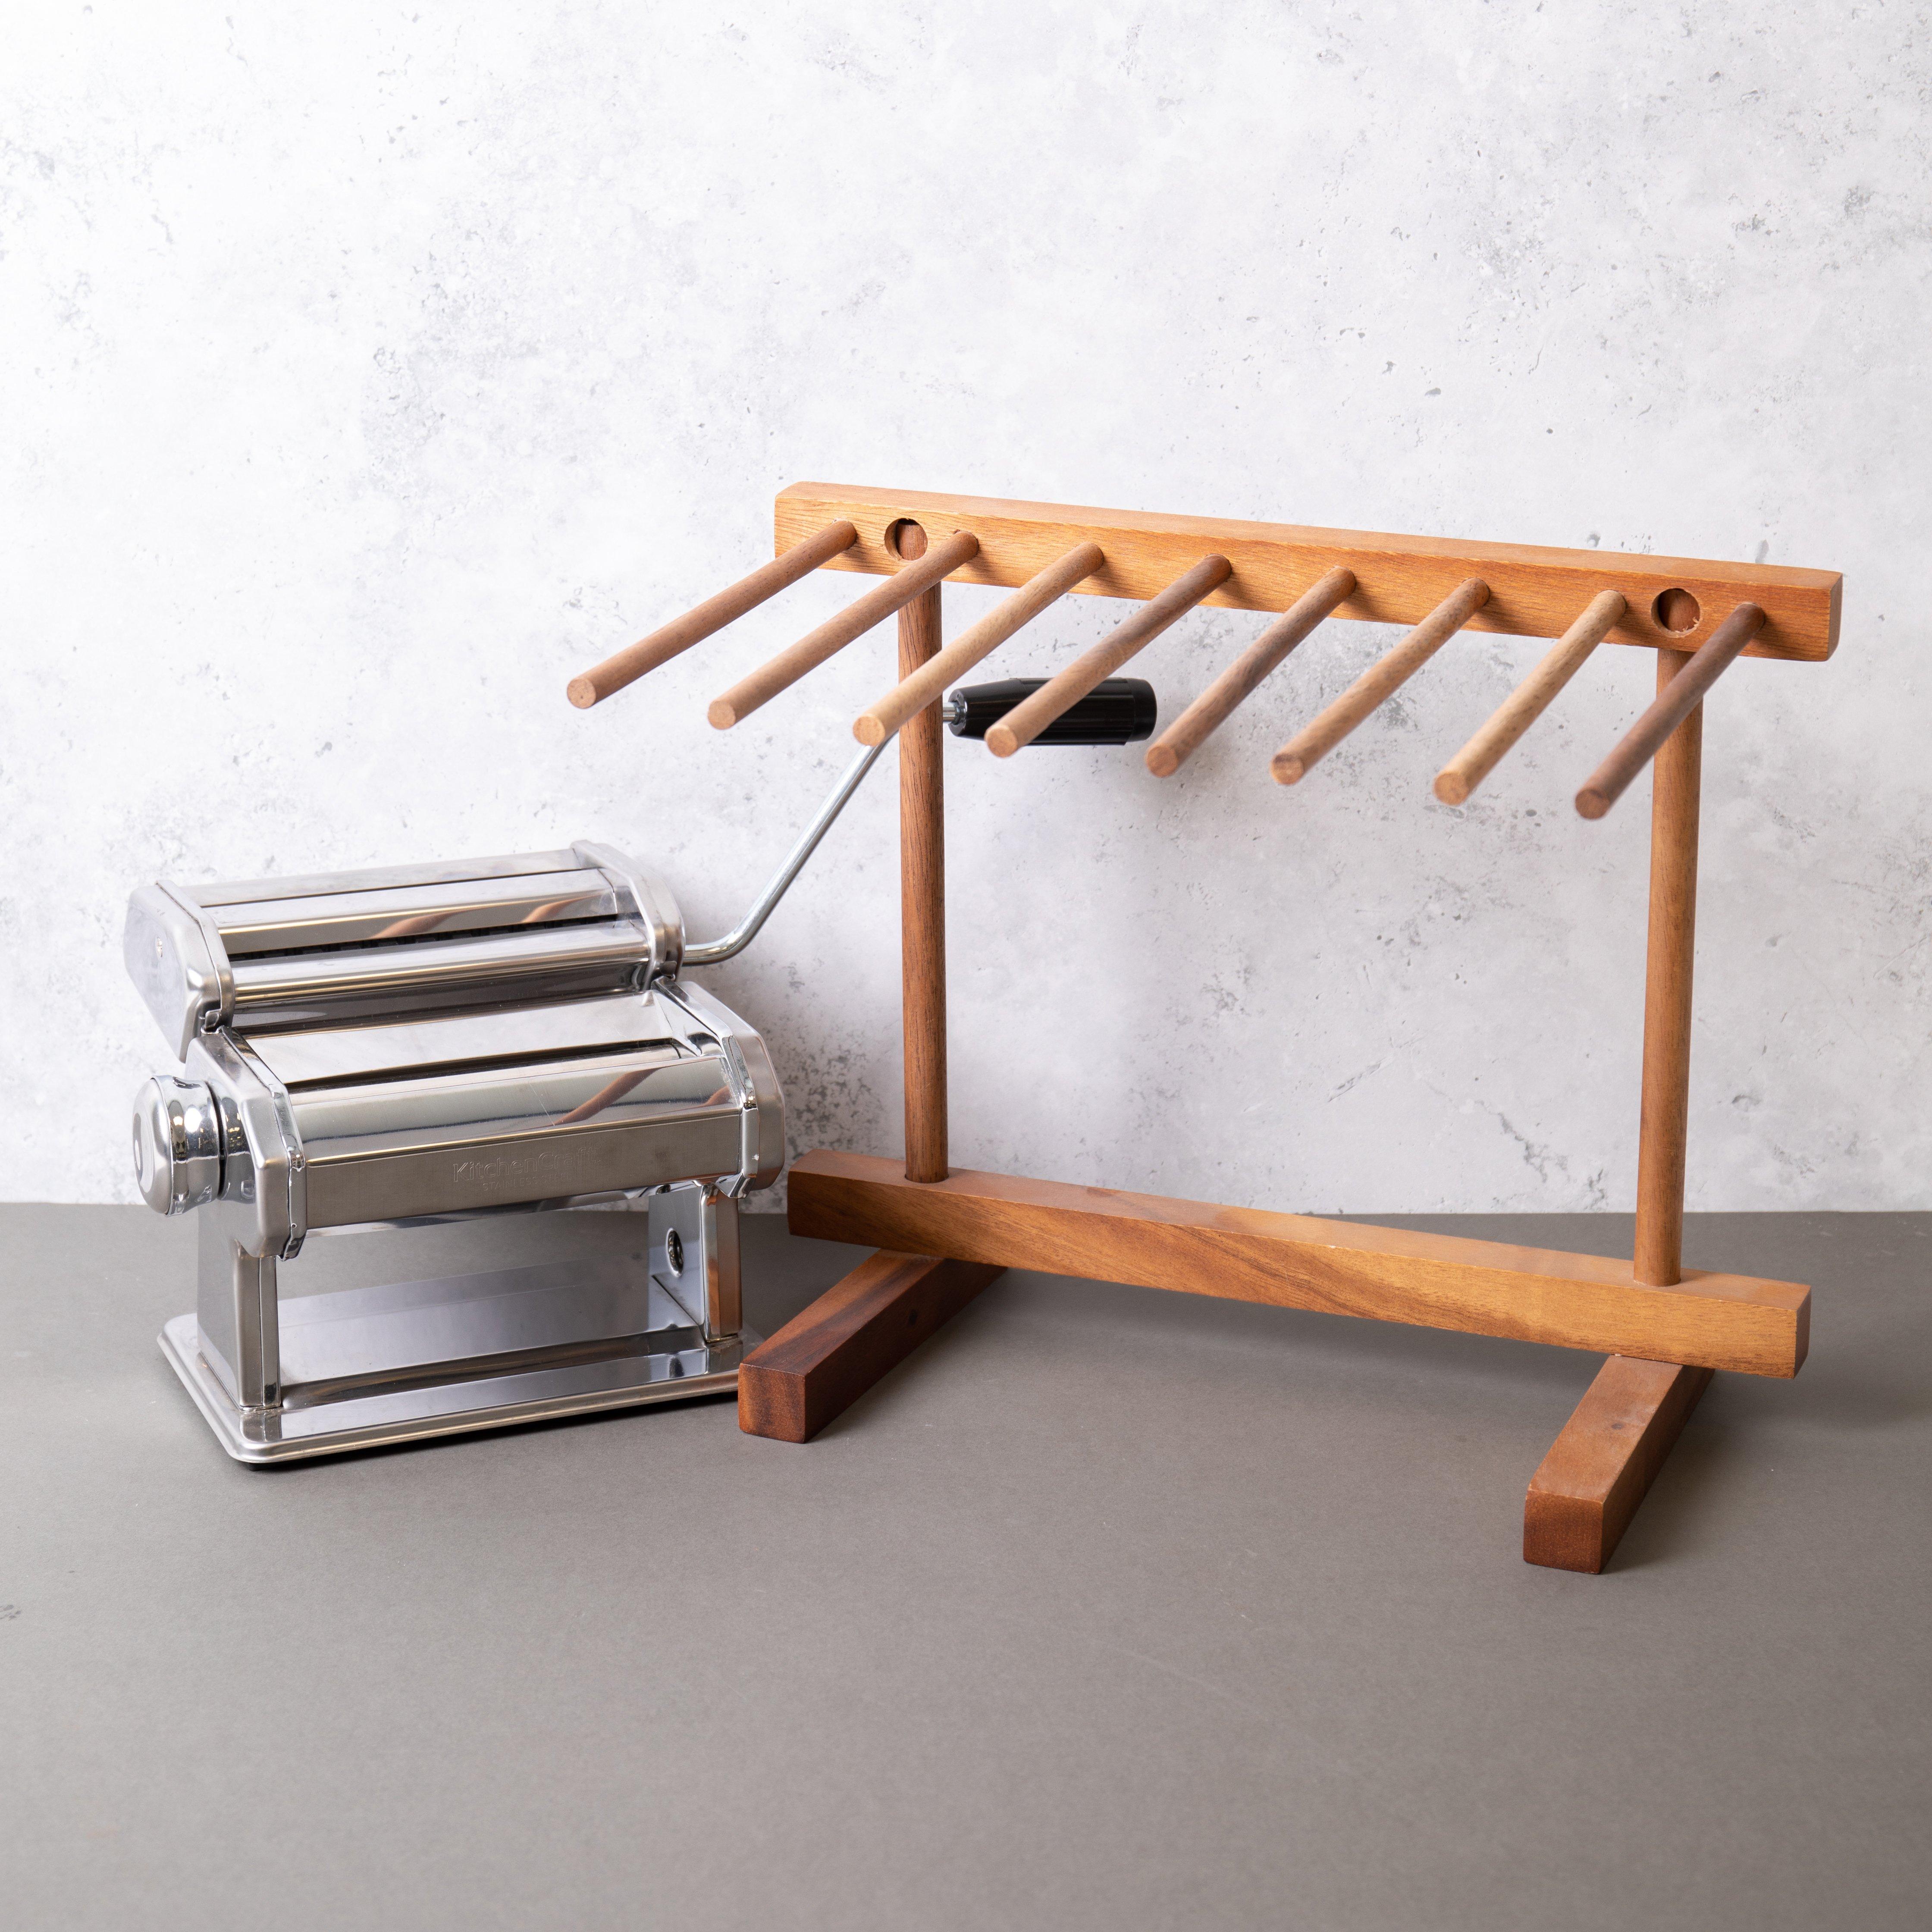 Pasta Making Set with Deluxe Double Cutter Pasta Machine and Pasta Drying Stand